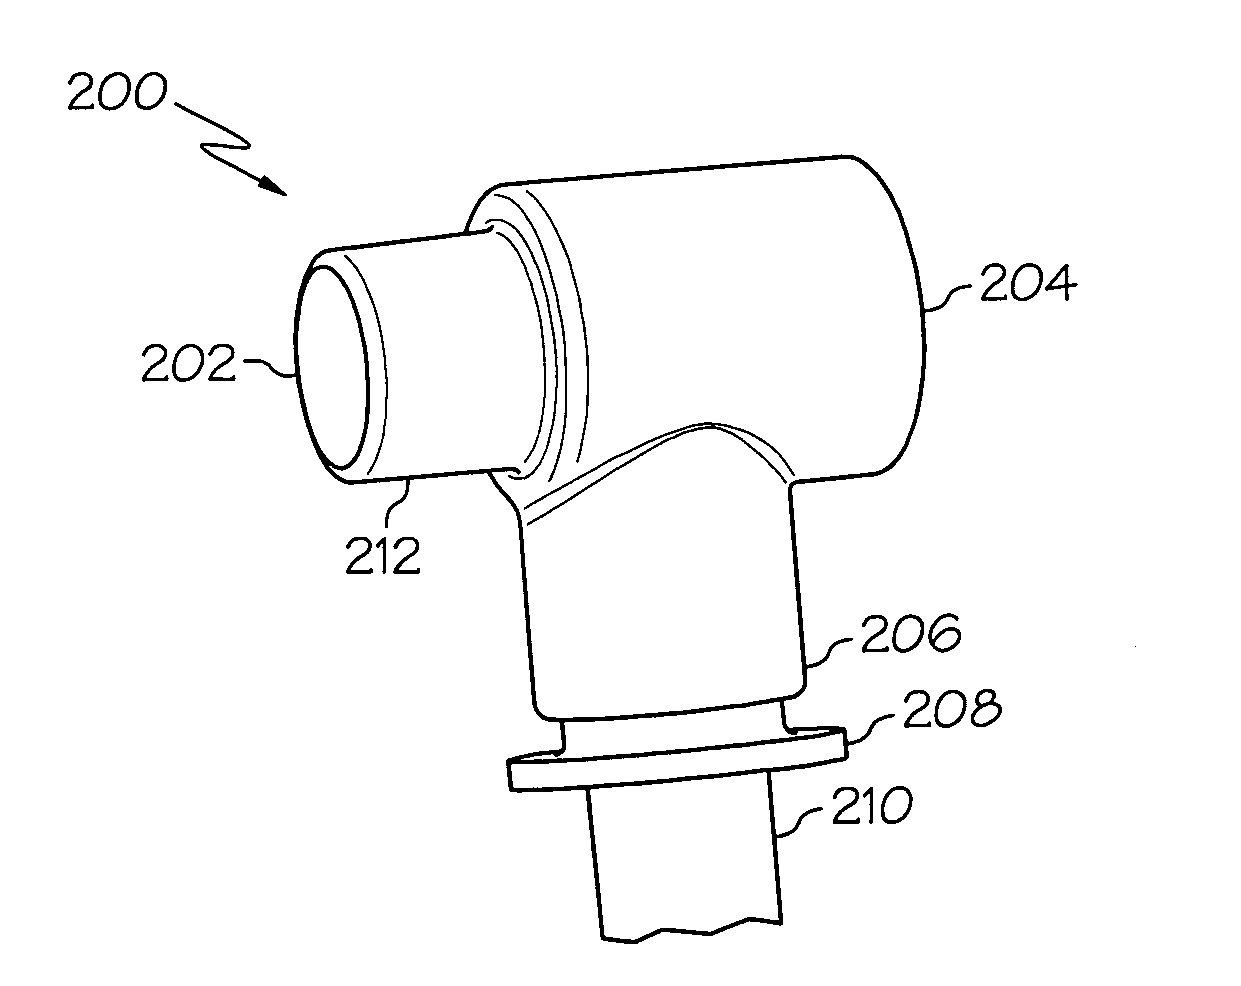 Artificial airway interfaces and methods thereof